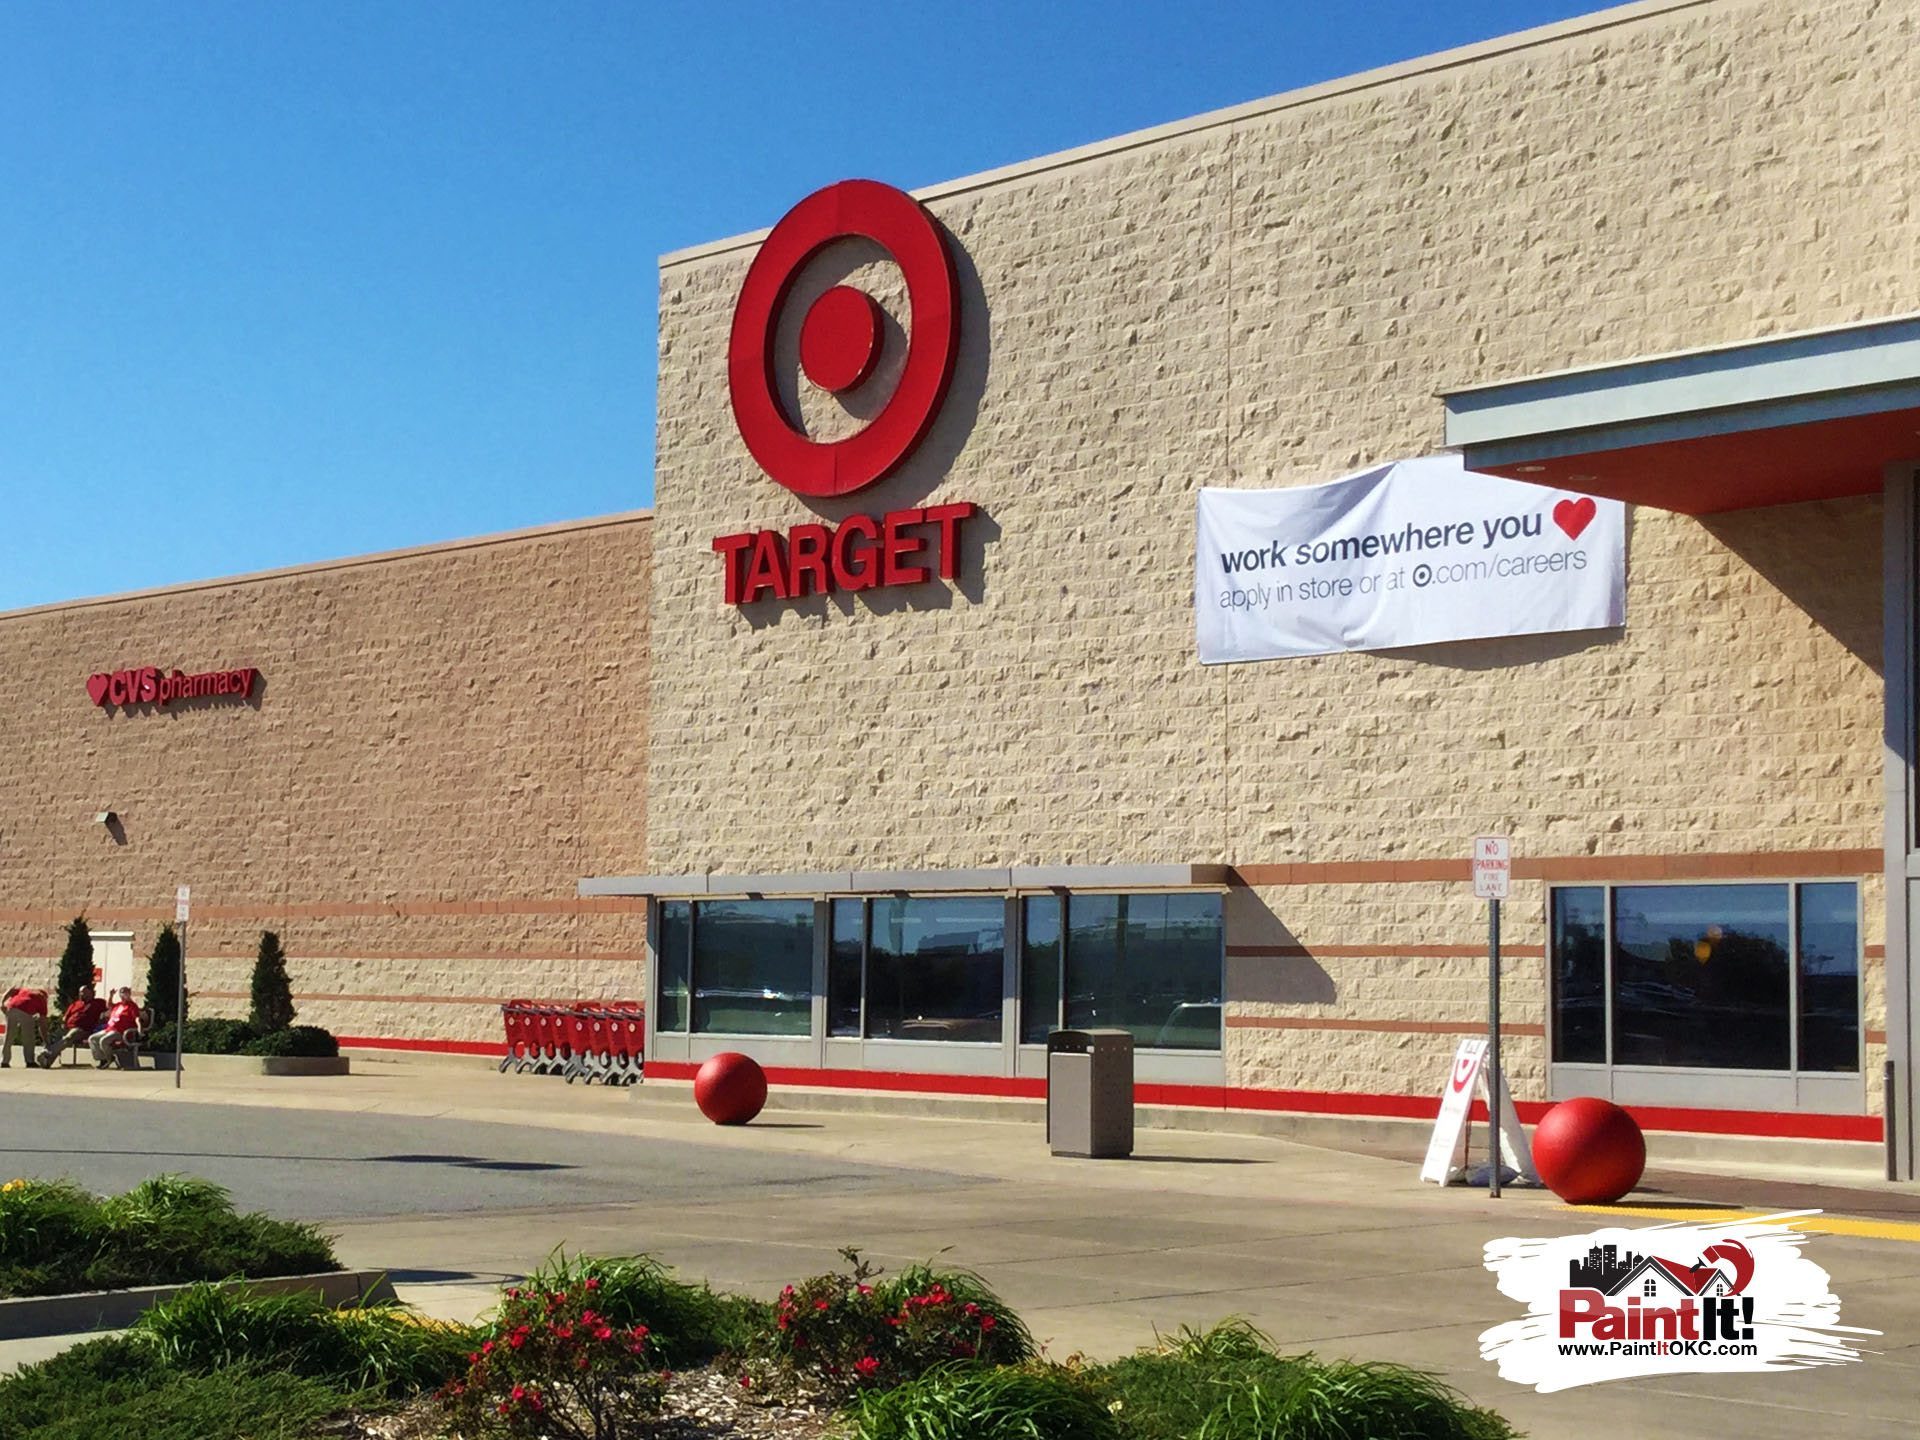 Paint It OKC gave Target some exterior painting in Edmond,OK.